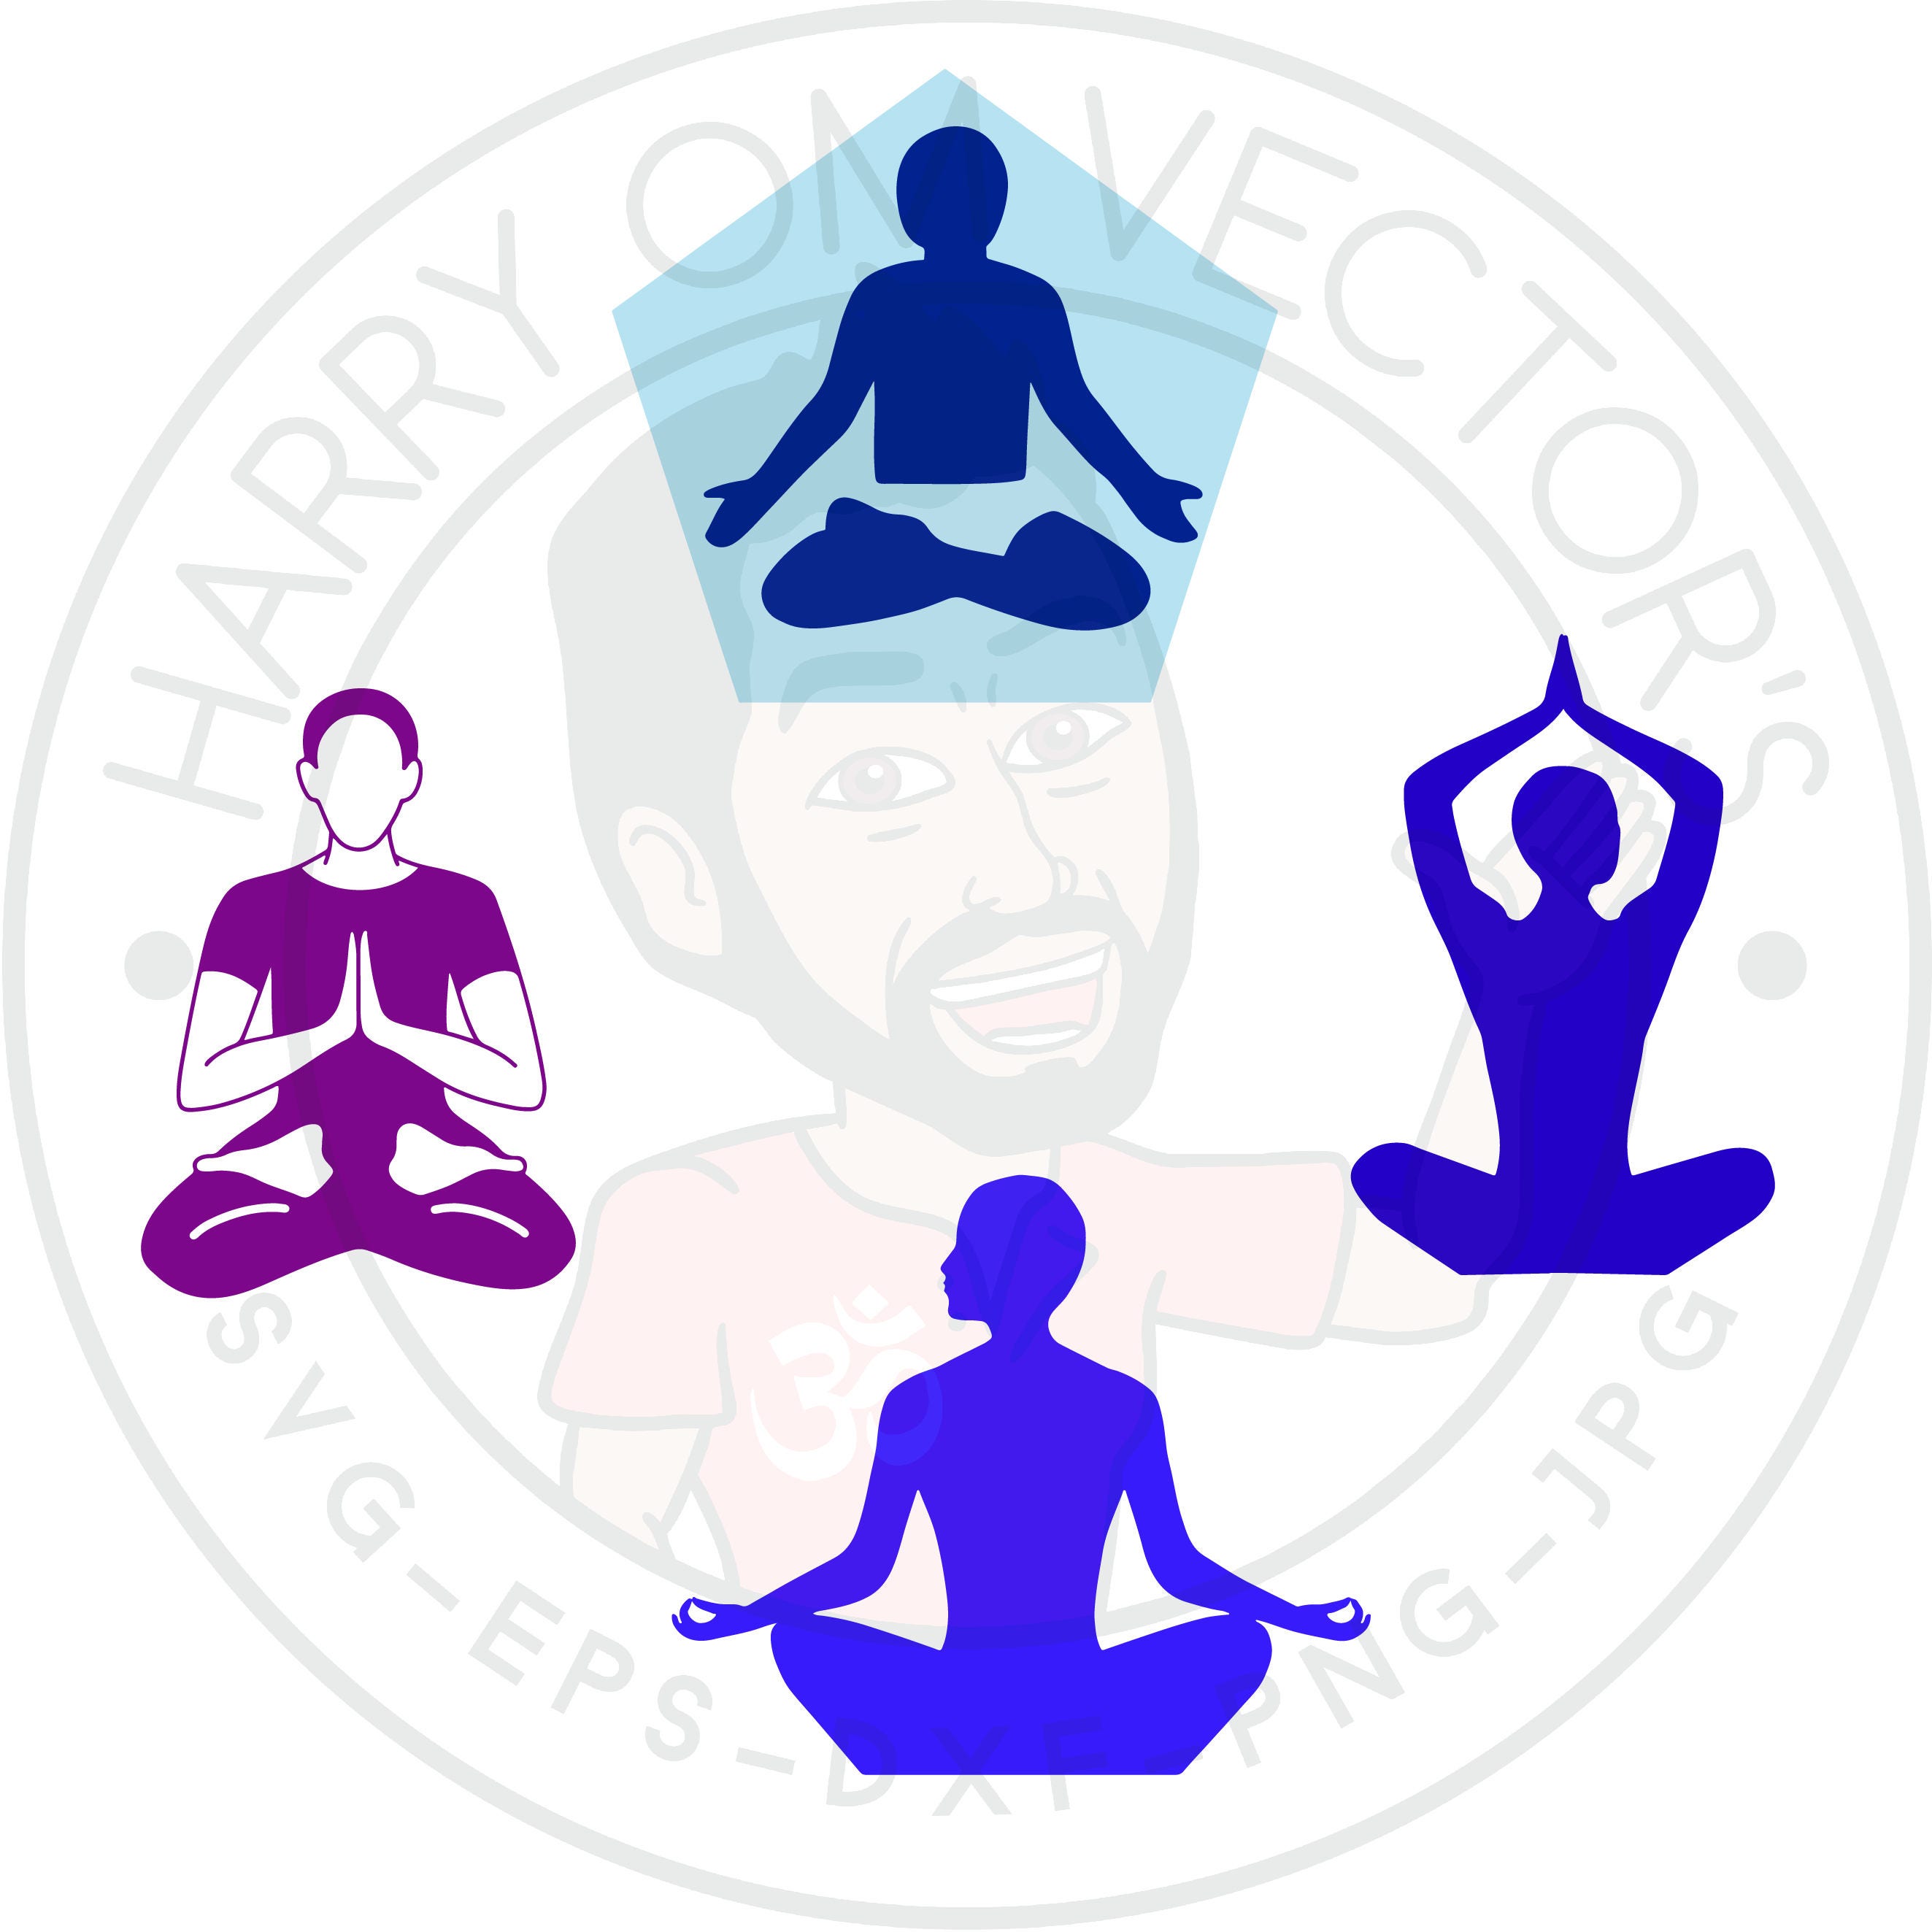 Download Sitting Meditation Vectors, SVG DXF For Silhouette Cameo ...